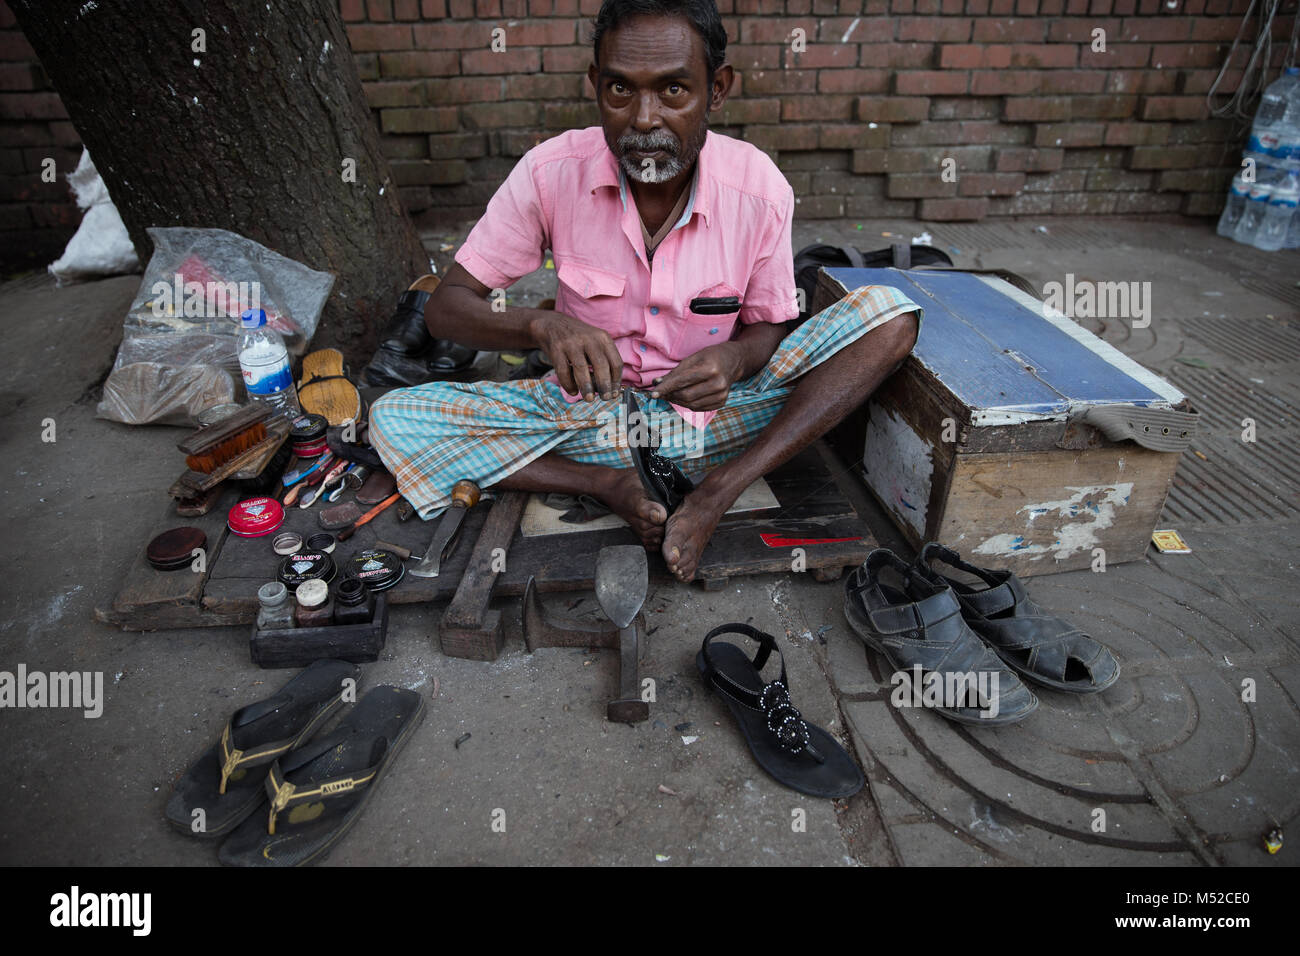 A cobbler sits working with his hands and his feet at the side of the street.  Dhaka, the capital of Bangladesh lies along the east bank of the Buriganga River in the heart of the Bengal delta. The city is a microcosm of the entire country, with diverse religious and ethnic communities. Dhaka is the economic, cultural and political center of Bangladesh and is a major financial center of South Asia. It is one of the world's most populated cities with a population of 18.89 million people in the Greater Dhaka Area. Stock Photo